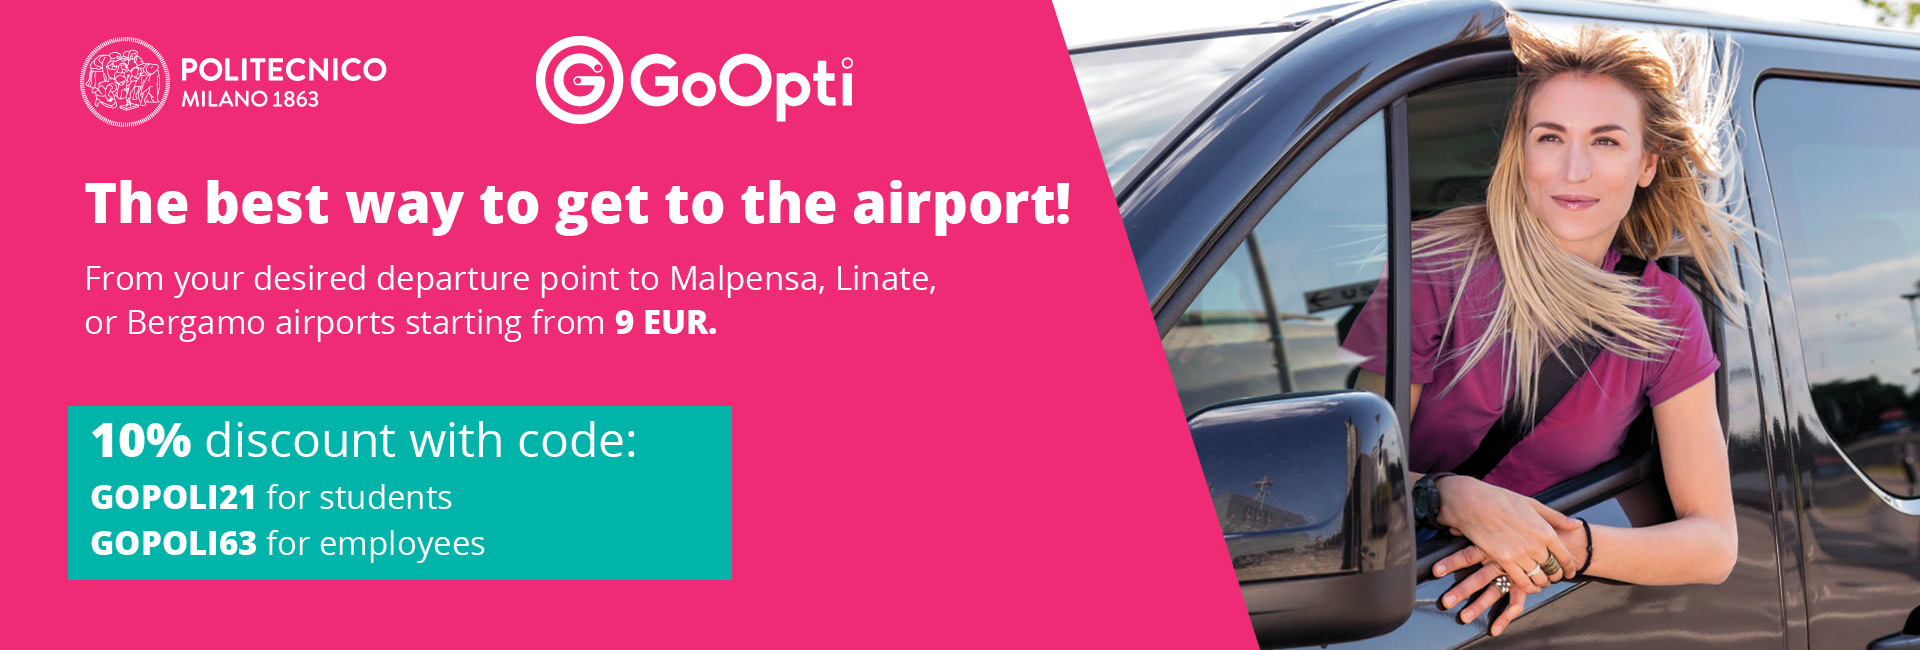 The best way to get to the airport! From your desired departure point to Malpensa, Linate or Bergamo airports starting from 9€.  10% discount with code: GOPOLI21 for students; GOPOLI63 for employees